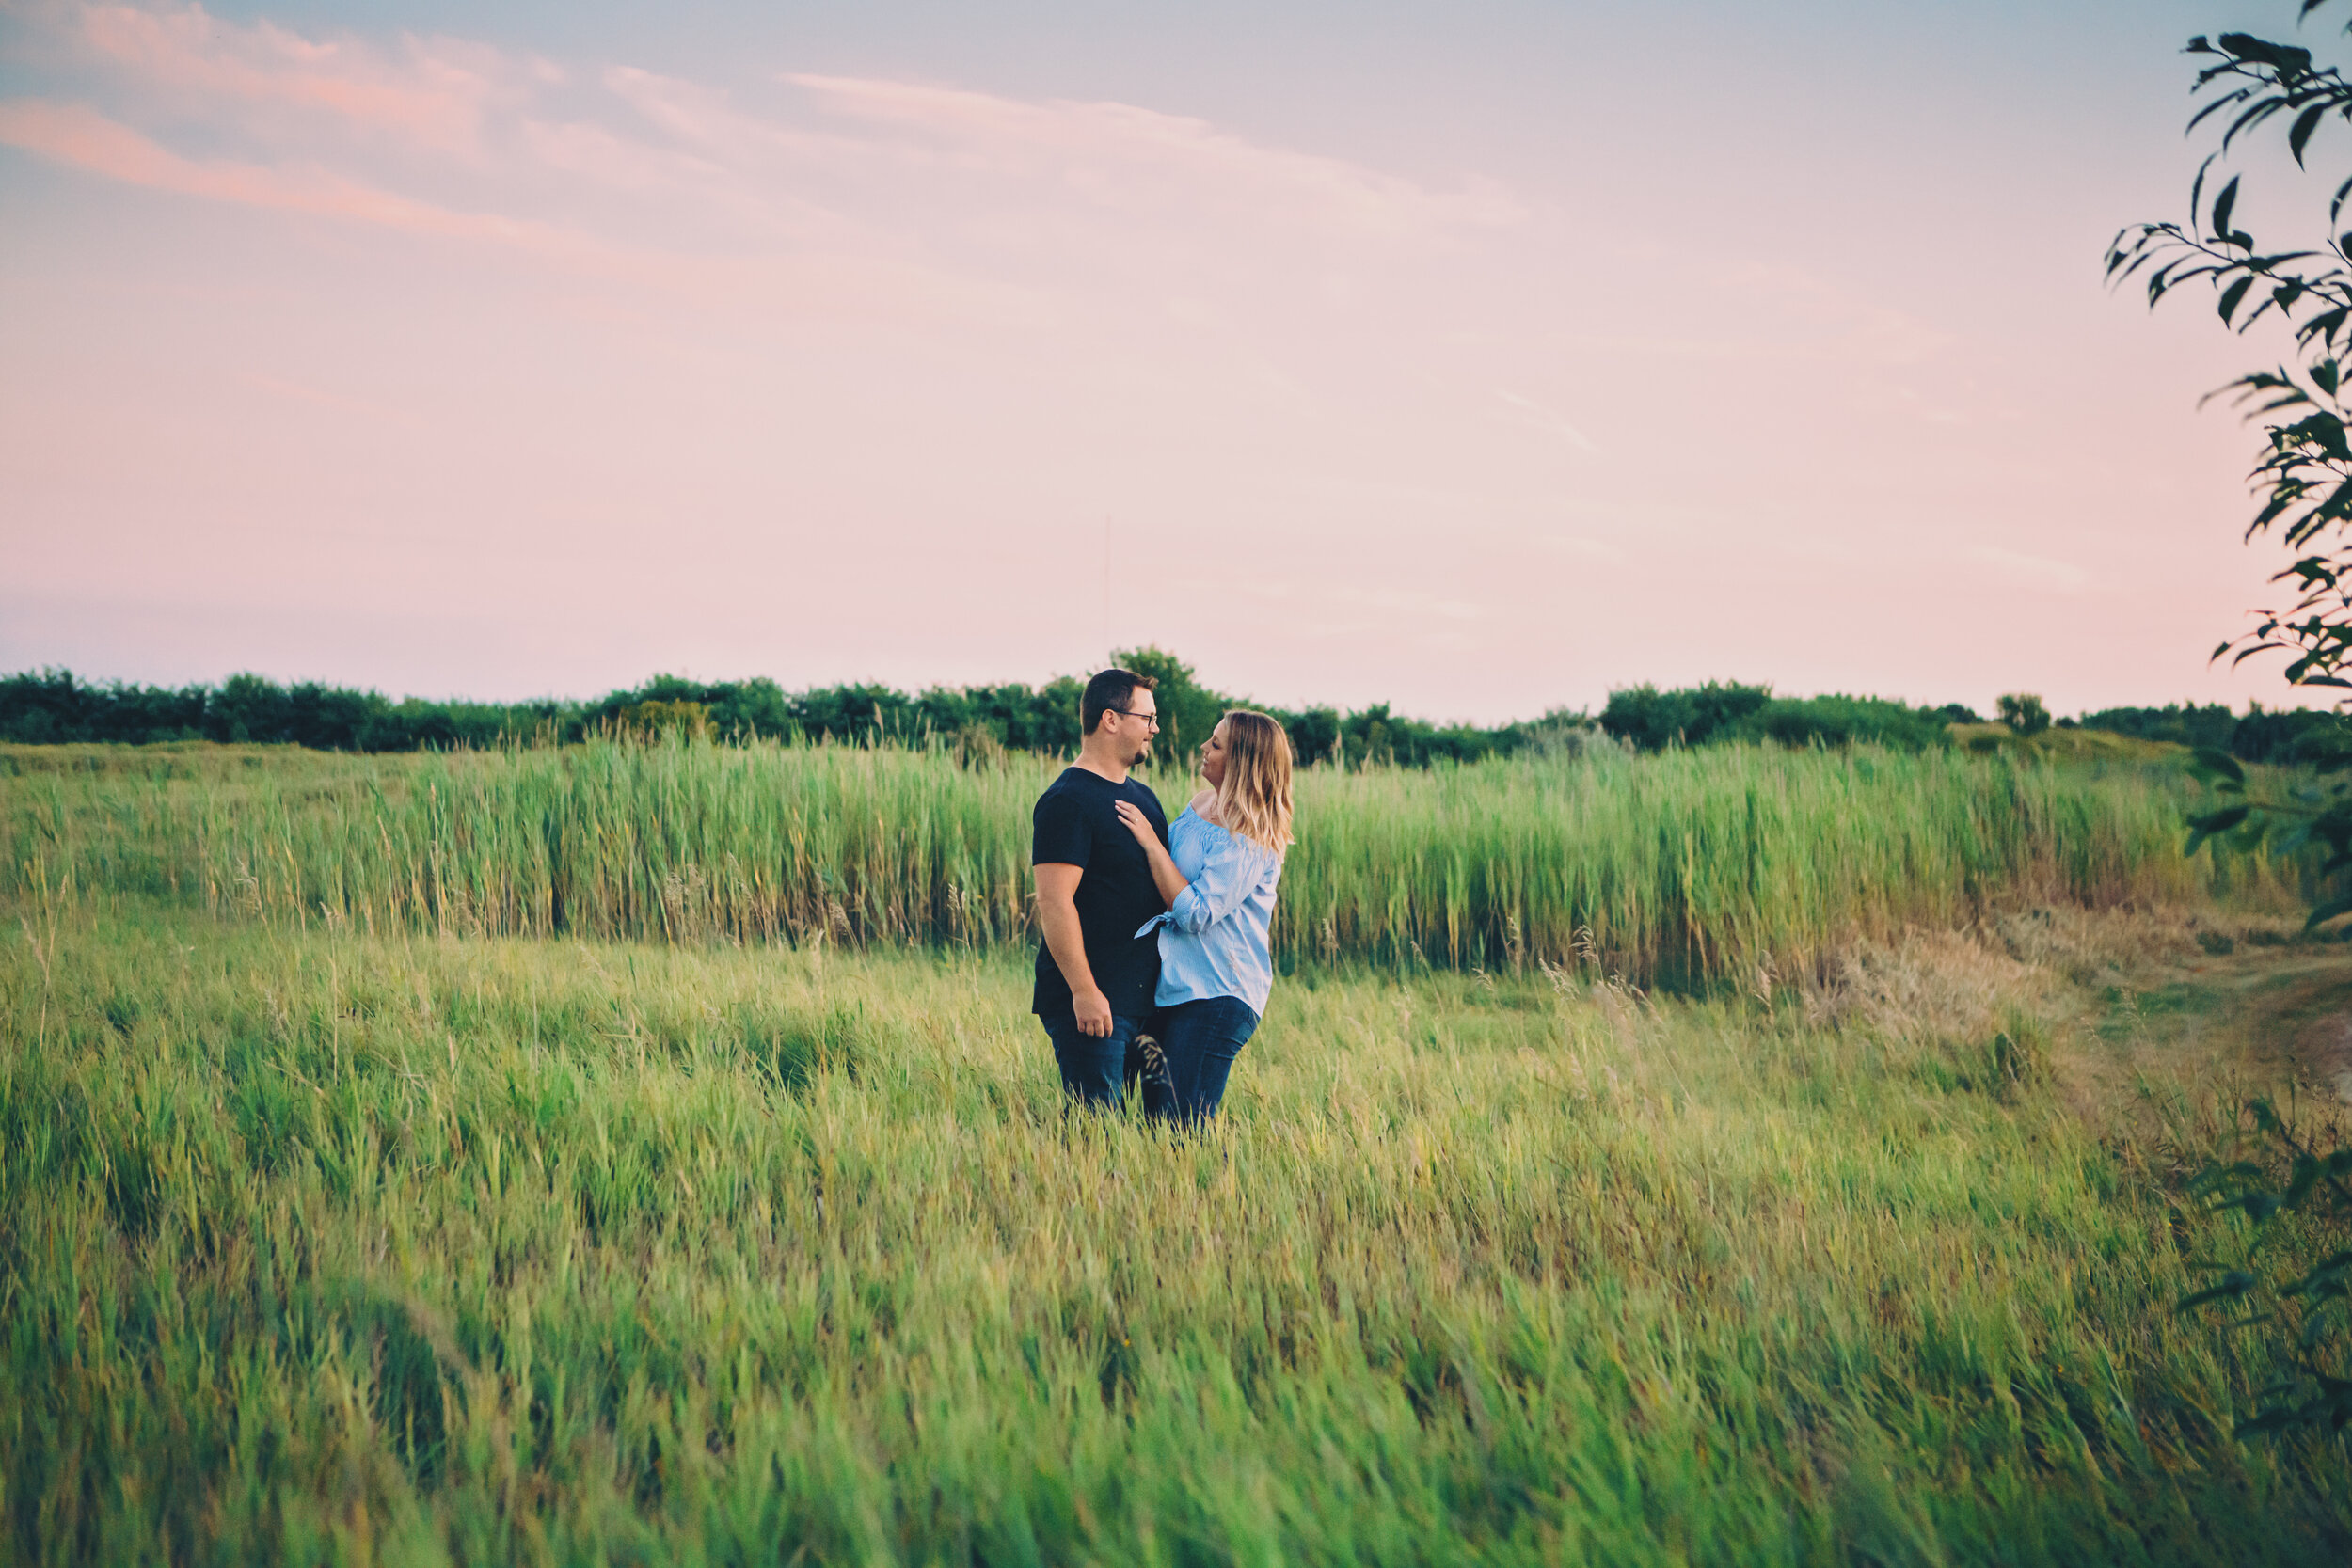  Open field with engaged couple as the sun sets #tealawardphotography #texasengagement #amarillophotographer #amarilloengagementphotographer #emotionalphotography #engagementphotography #couplesphotography #engagement #engaged #westernphotography #texasfiance 